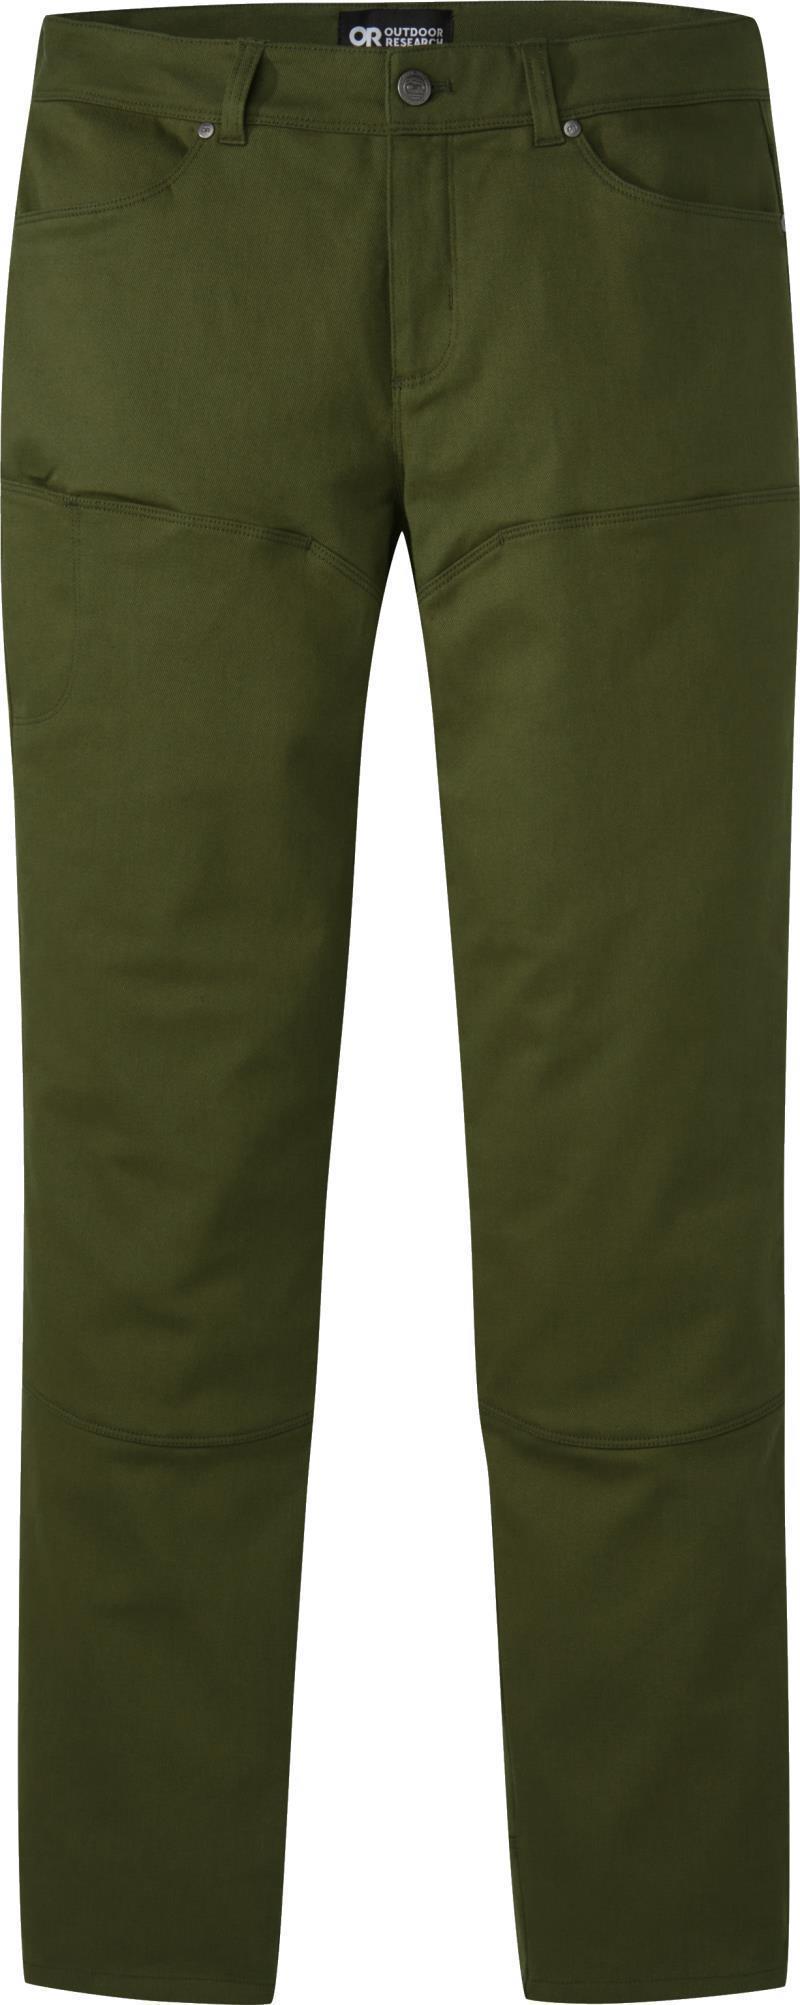 Lined Work Pants - Womens